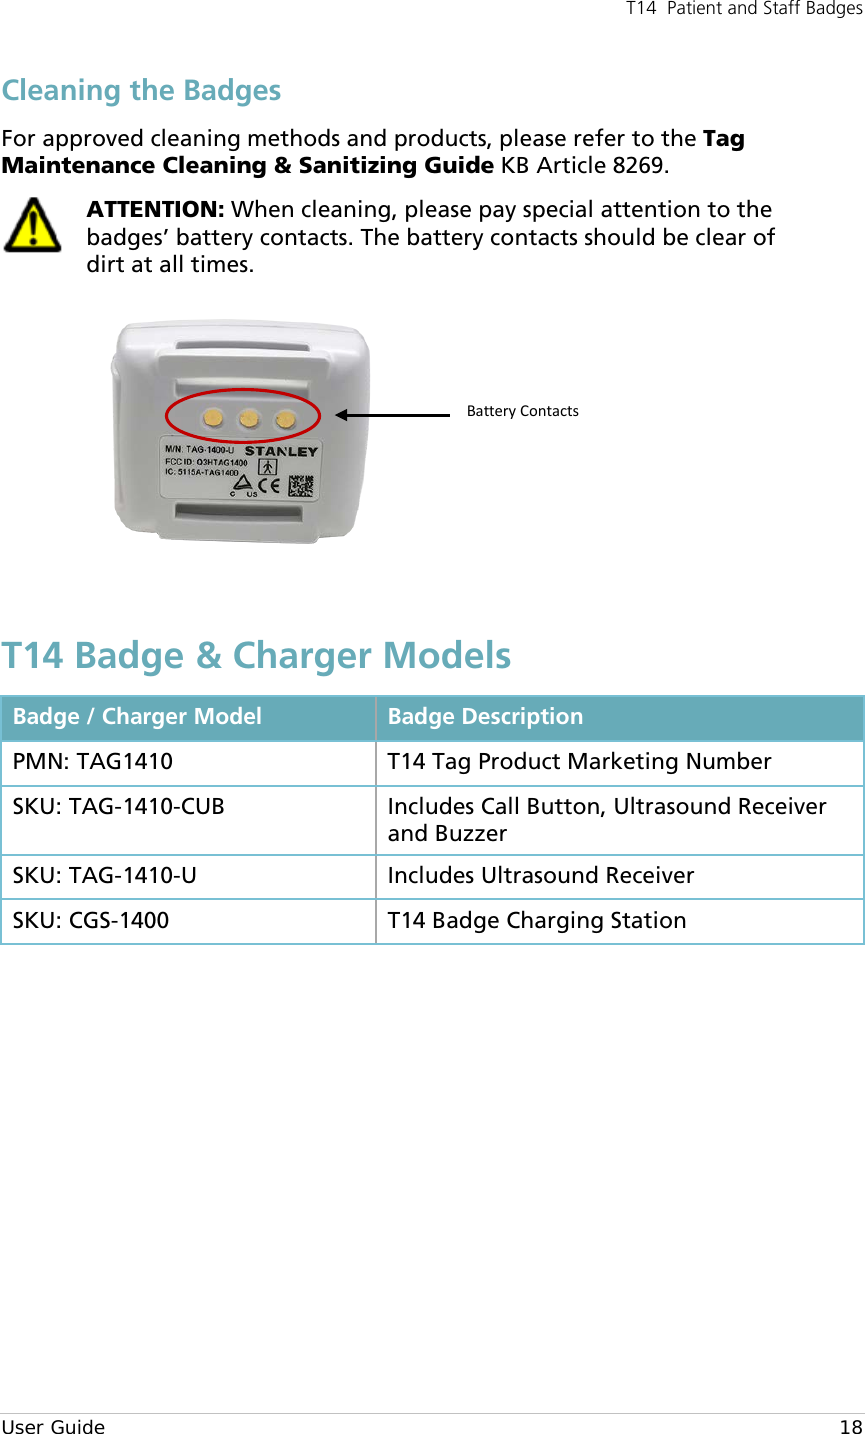 T14  Patient and Staff Badges  User Guide    18 Cleaning the Badges For approved cleaning methods and products, please refer to the Tag Maintenance Cleaning &amp; Sanitizing Guide KB Article 8269.  ATTENTION: When cleaning, please pay special attention to the badges’ battery contacts. The battery contacts should be clear of dirt at all times.  T14 Badge &amp; Charger Models Badge / Charger Model Badge Description PMN: TAG1410 T14 Tag Product Marketing Number SKU: TAG-1410-CUB Includes Call Button, Ultrasound Receiver and Buzzer  SKU: TAG-1410-U Includes Ultrasound Receiver  SKU: CGS-1400 T14 Badge Charging Station          Battery Contacts 